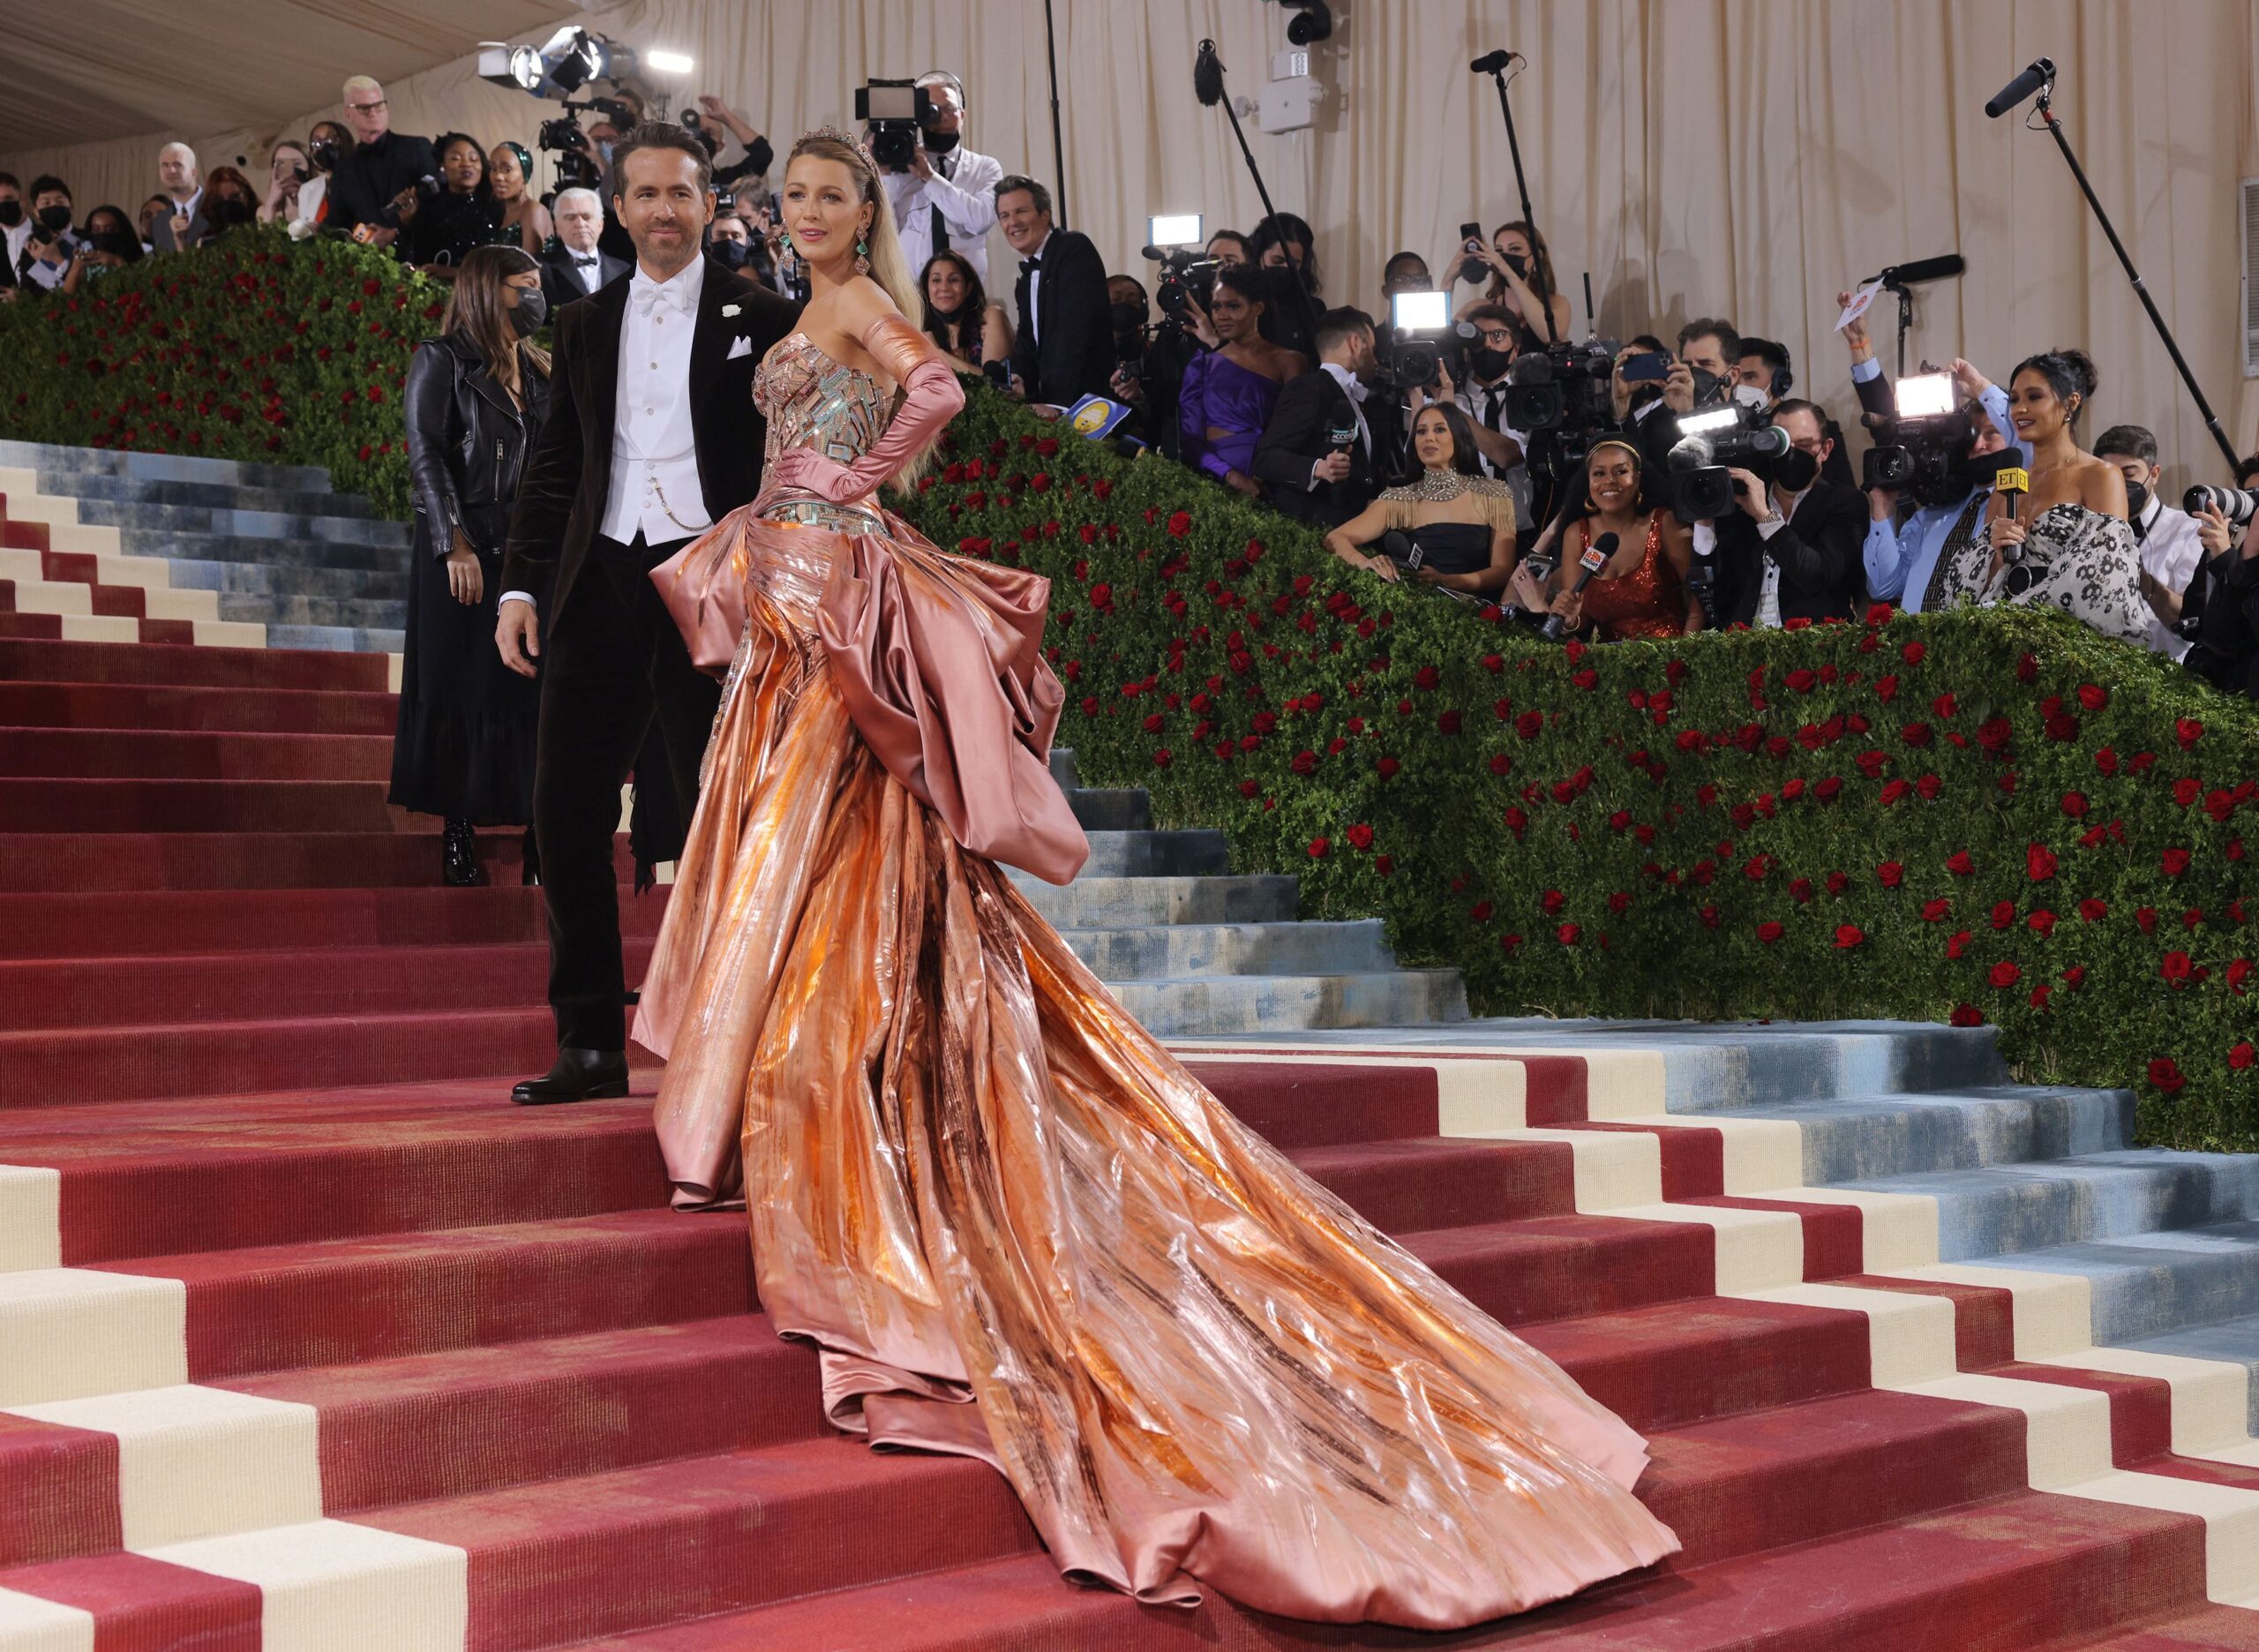 Best dressed at the Met Gala 2022: From Blake Lively to HoYeon Jung